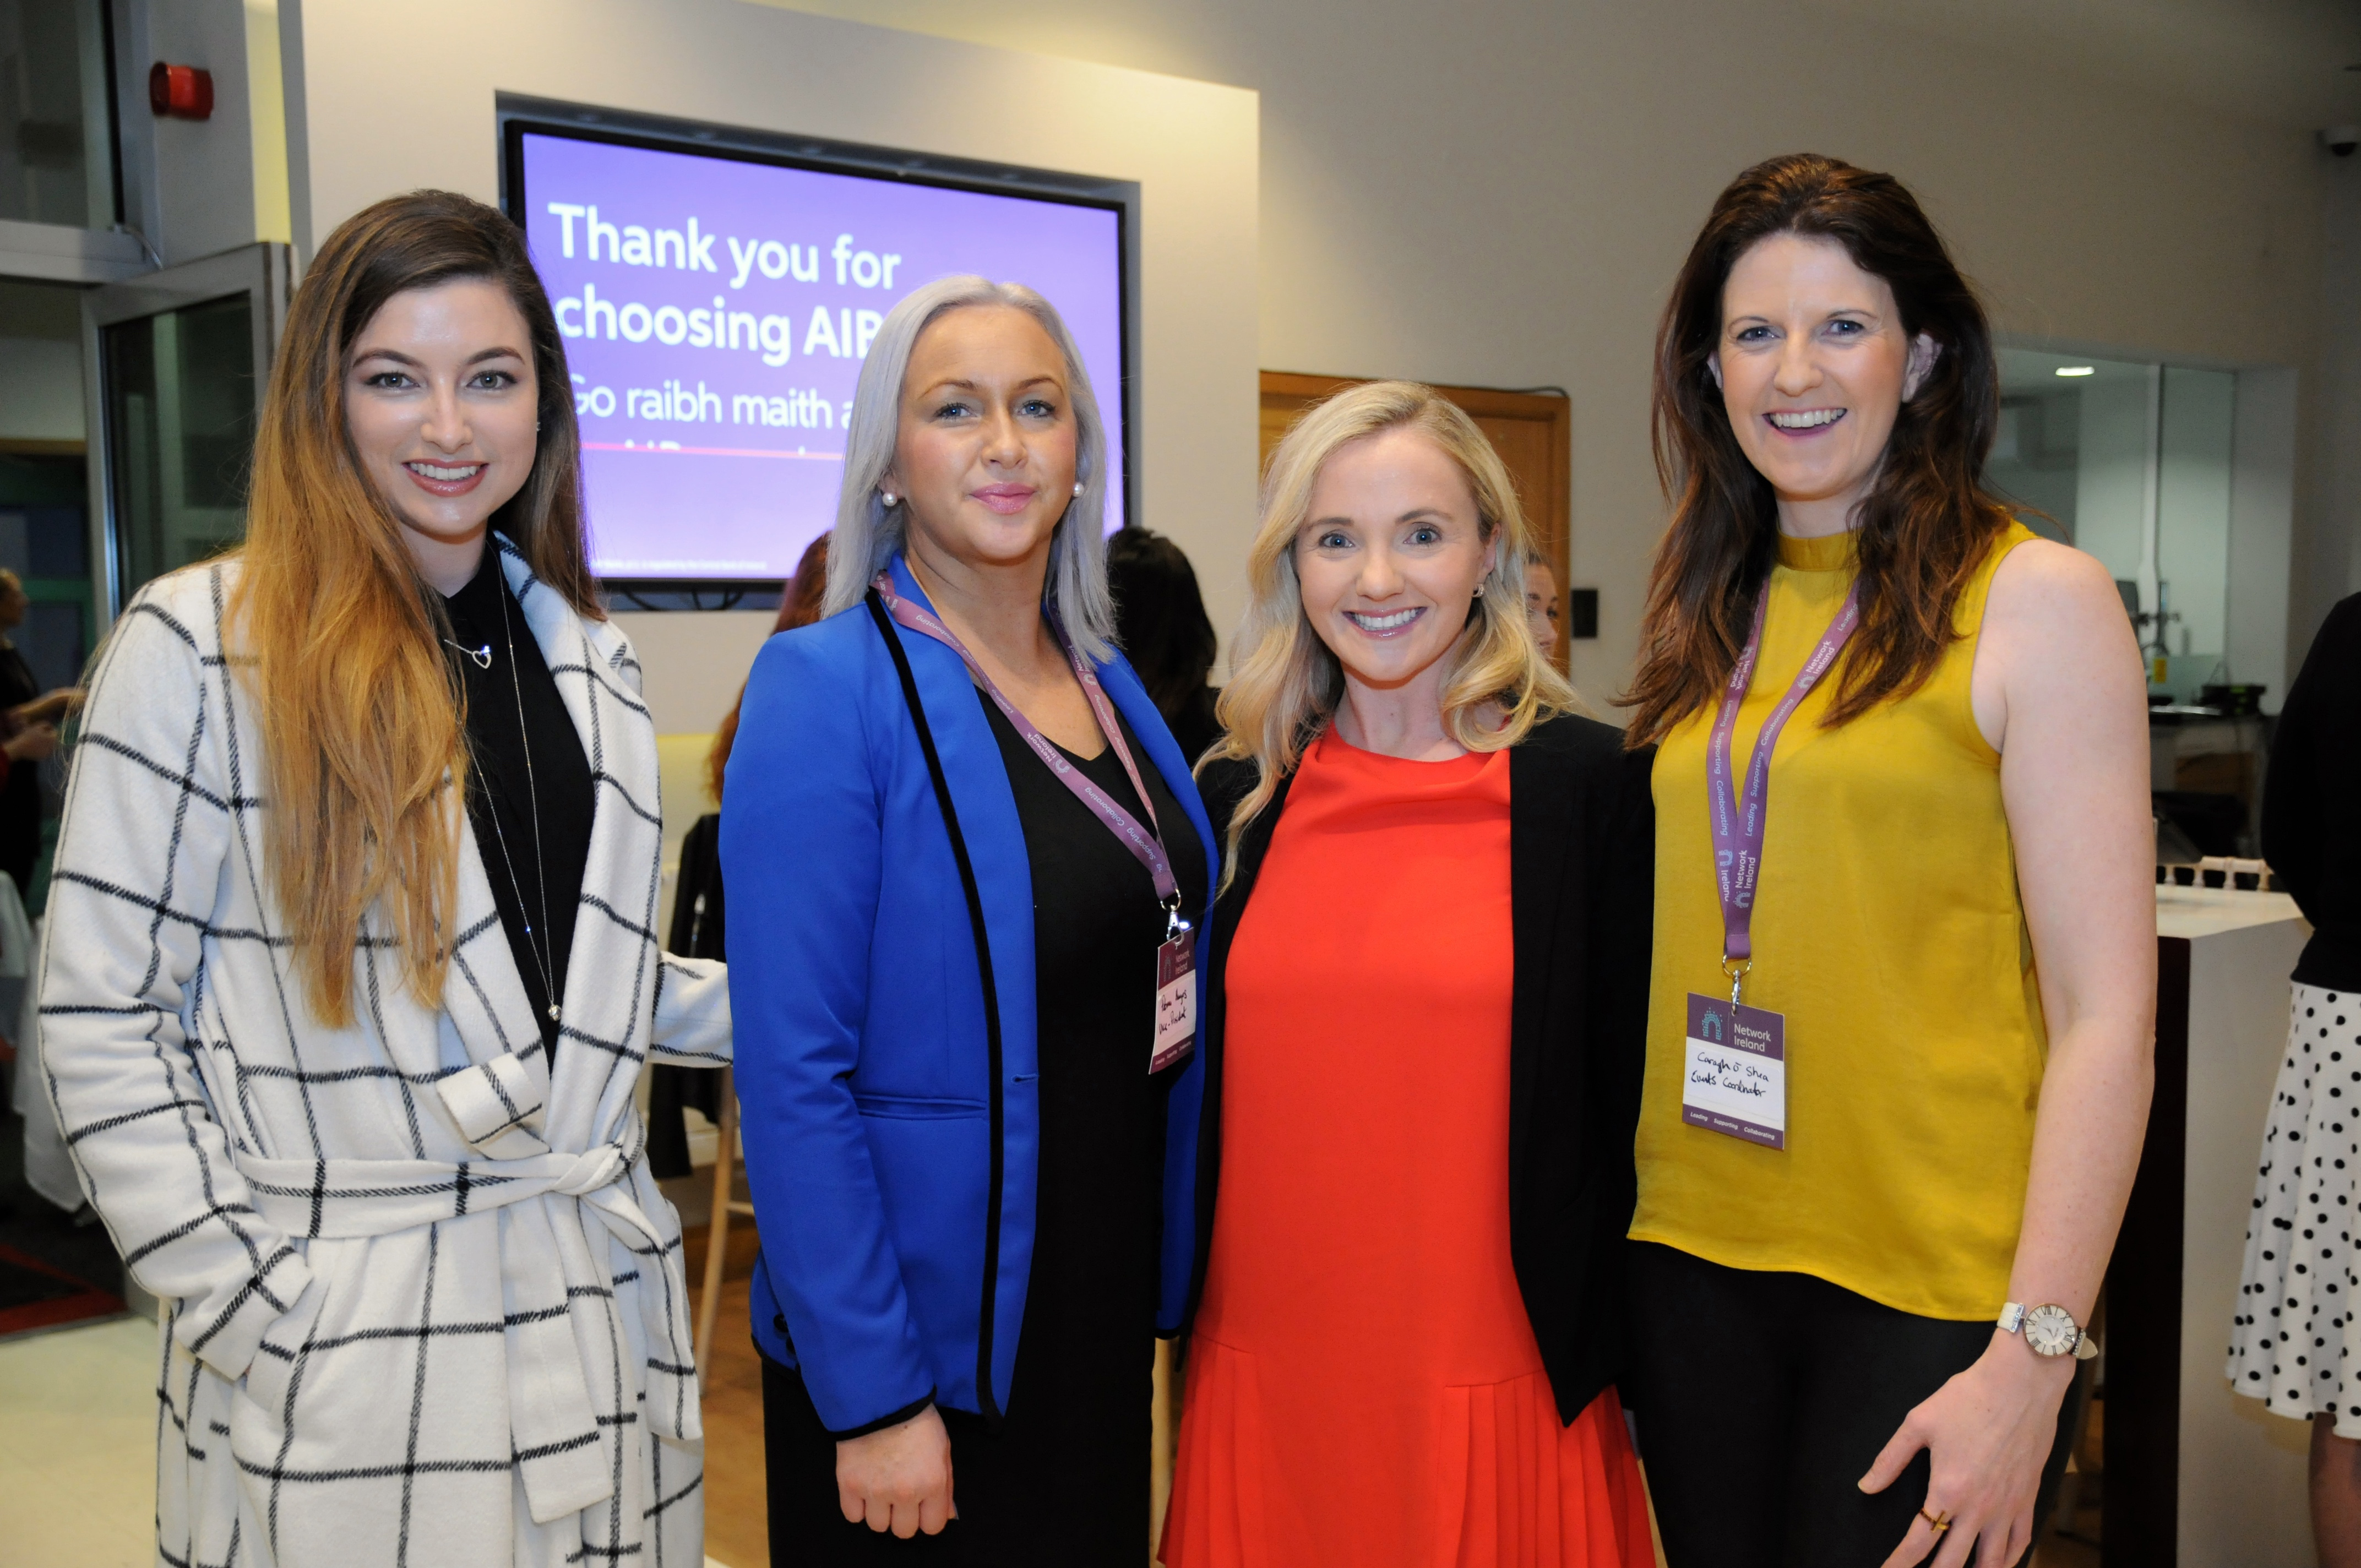 At the Network Ireland Limerick event, Branding your business in AIB O’Connell St was Megan Scully, Petrina Hayes, Shona Keane and Caragh O’Shea